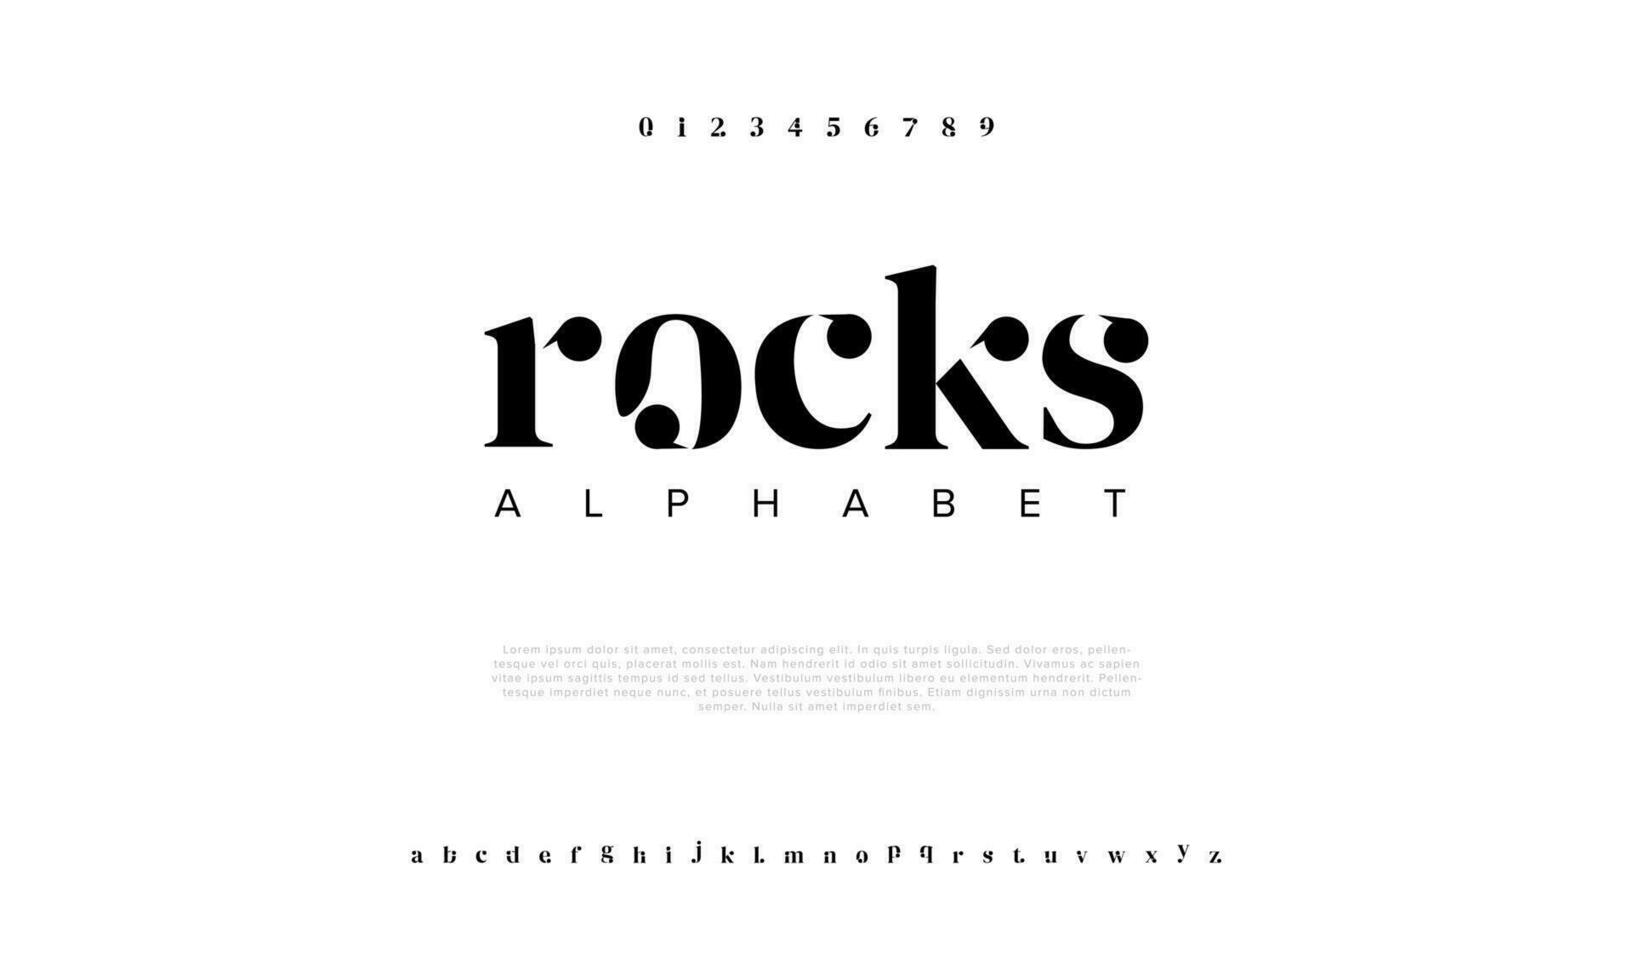 Rocks abstract digital technology logo font alphabet. Minimal modern urban fonts for logo, brand etc. Typography typeface uppercase lowercase and number. vector illustration